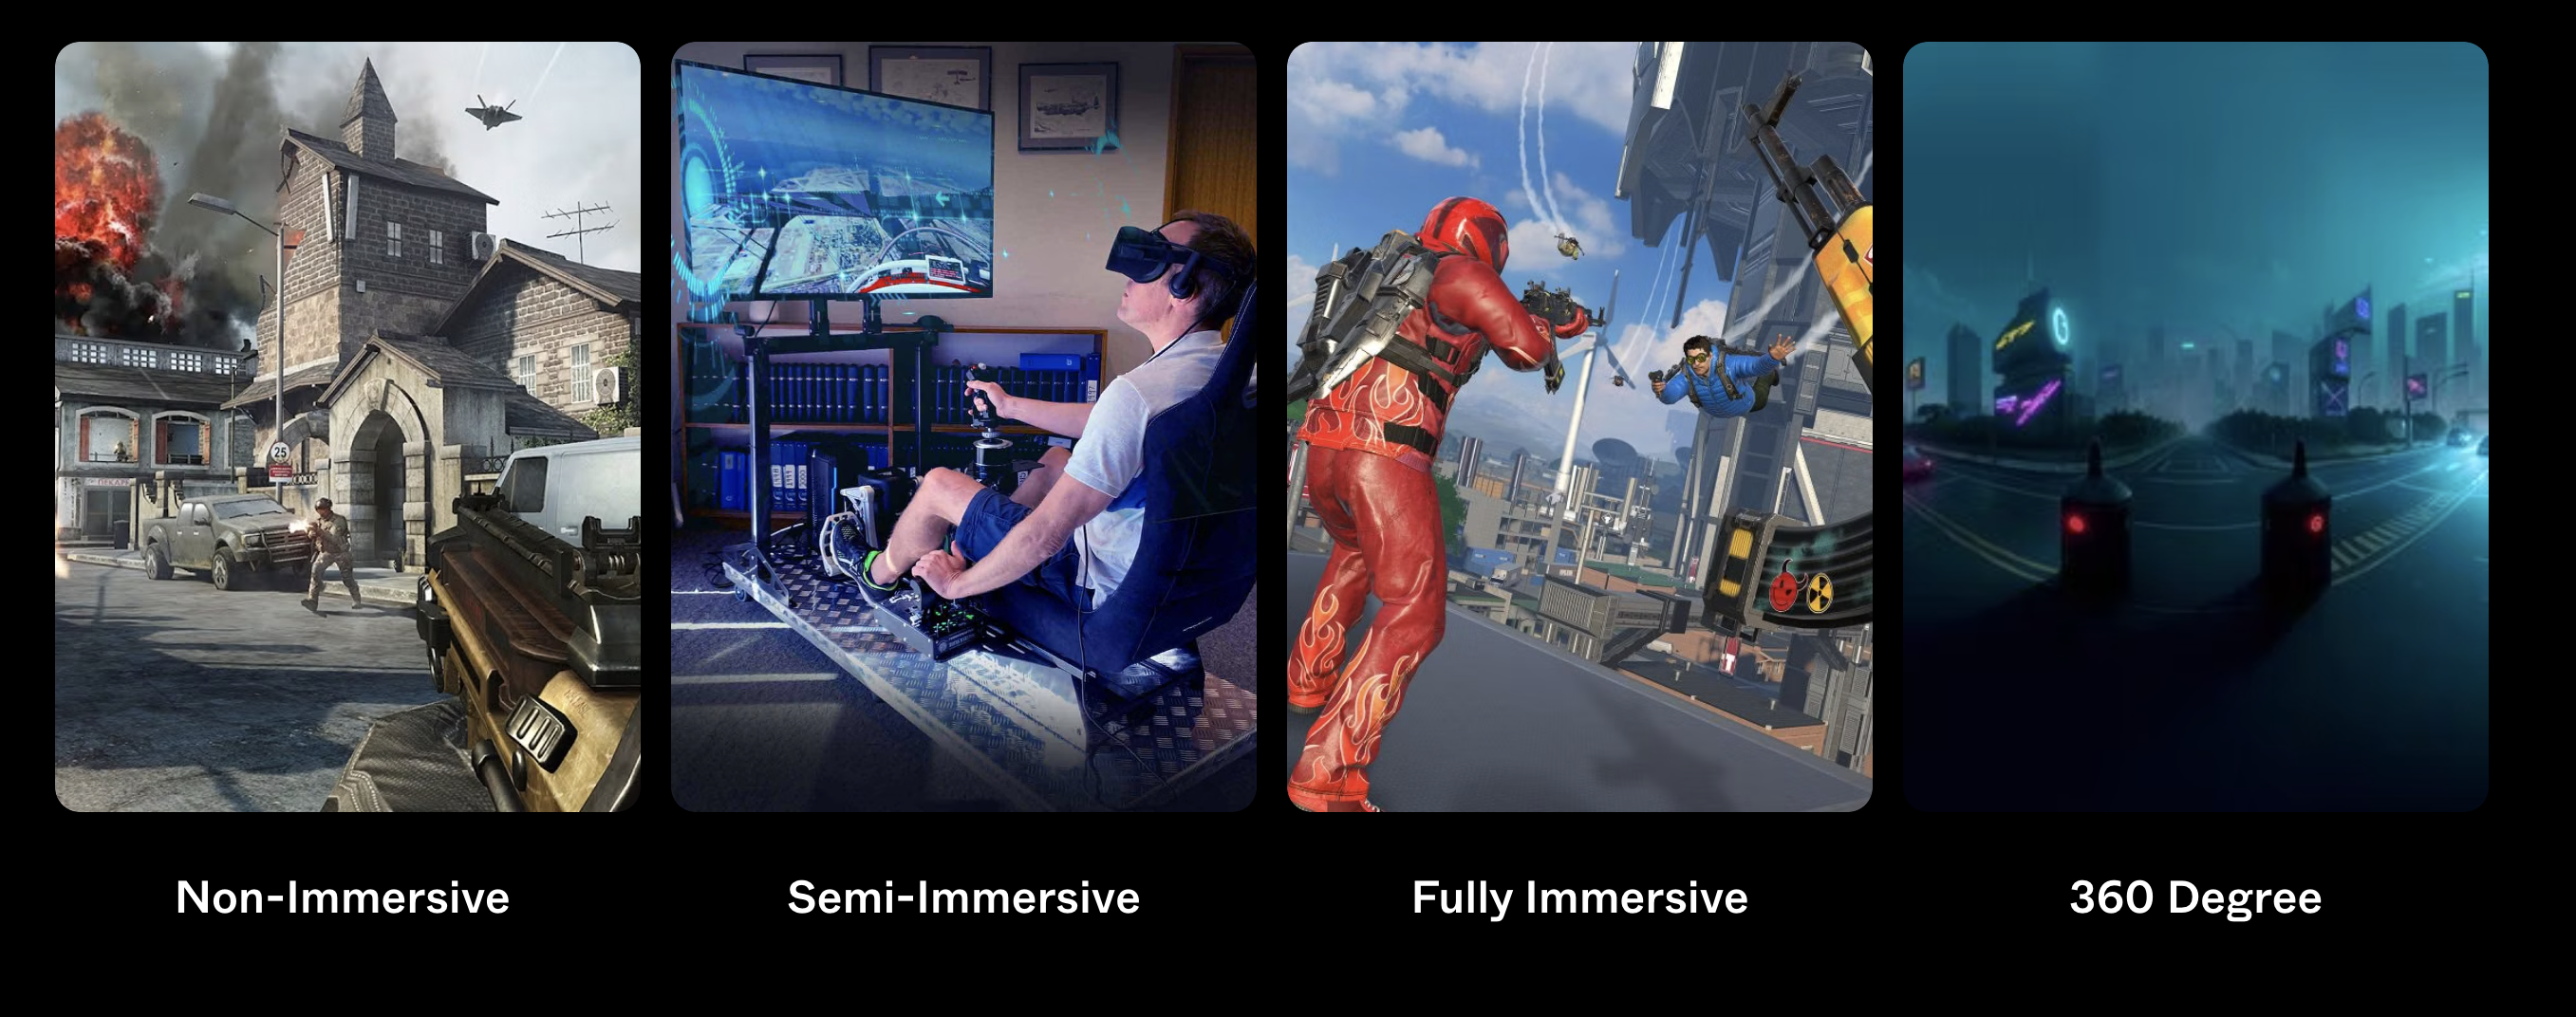 Types of Virtual Reality Experiences